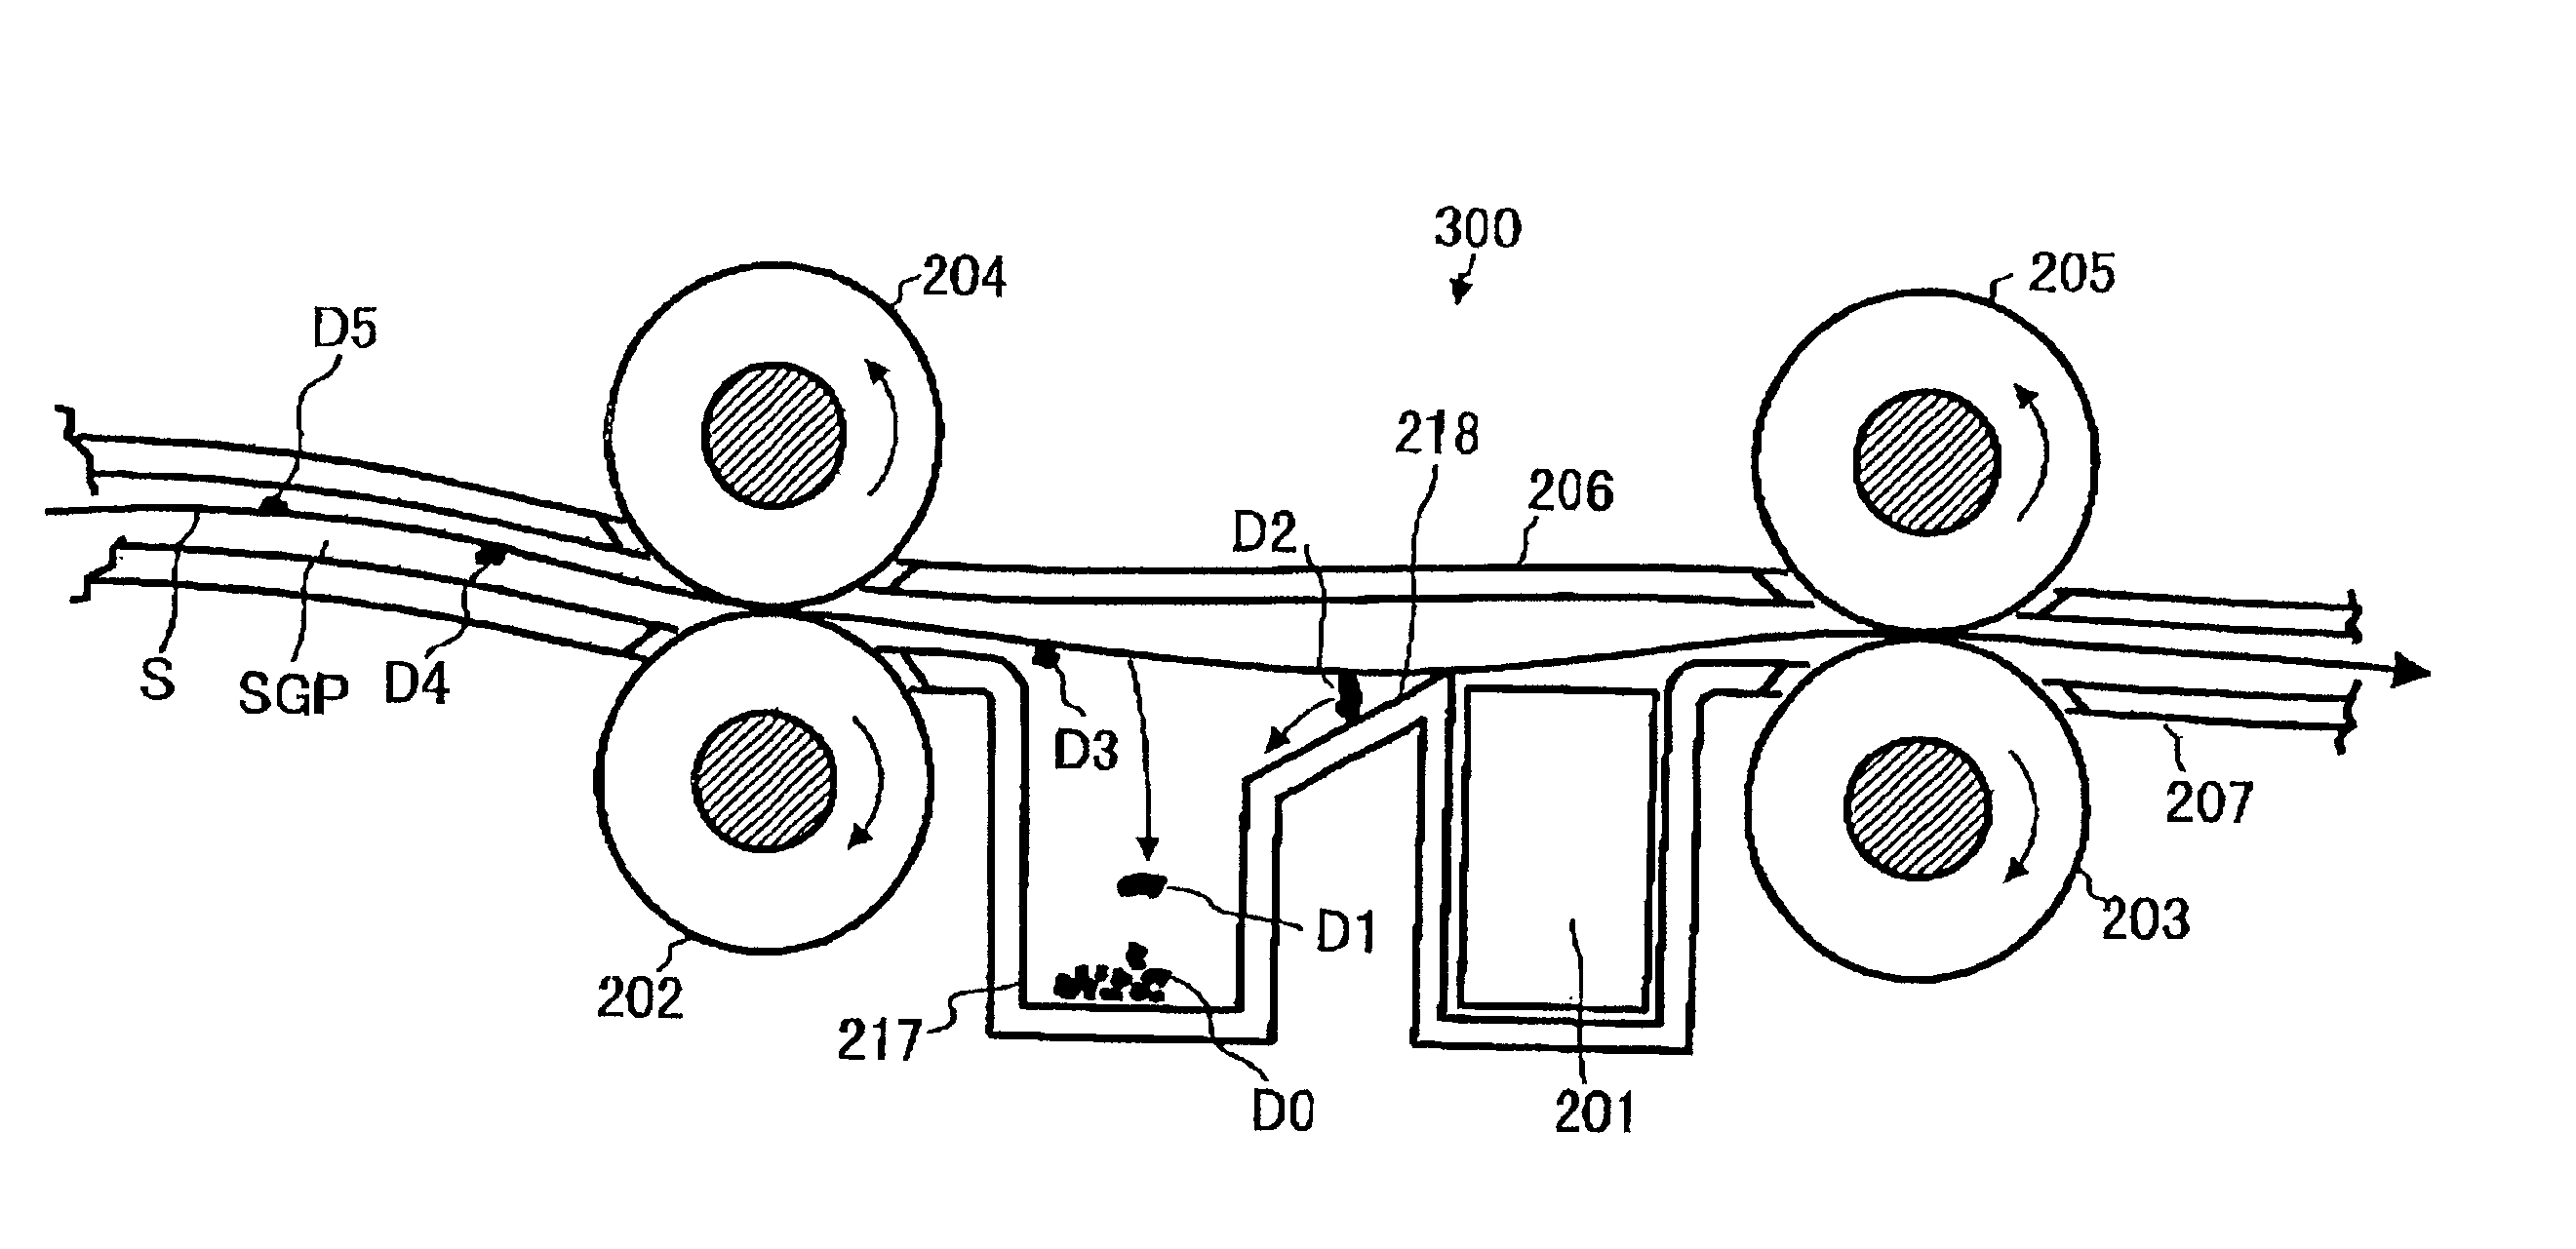 Image reading apparatus and an image processing system having a dirt trapping device